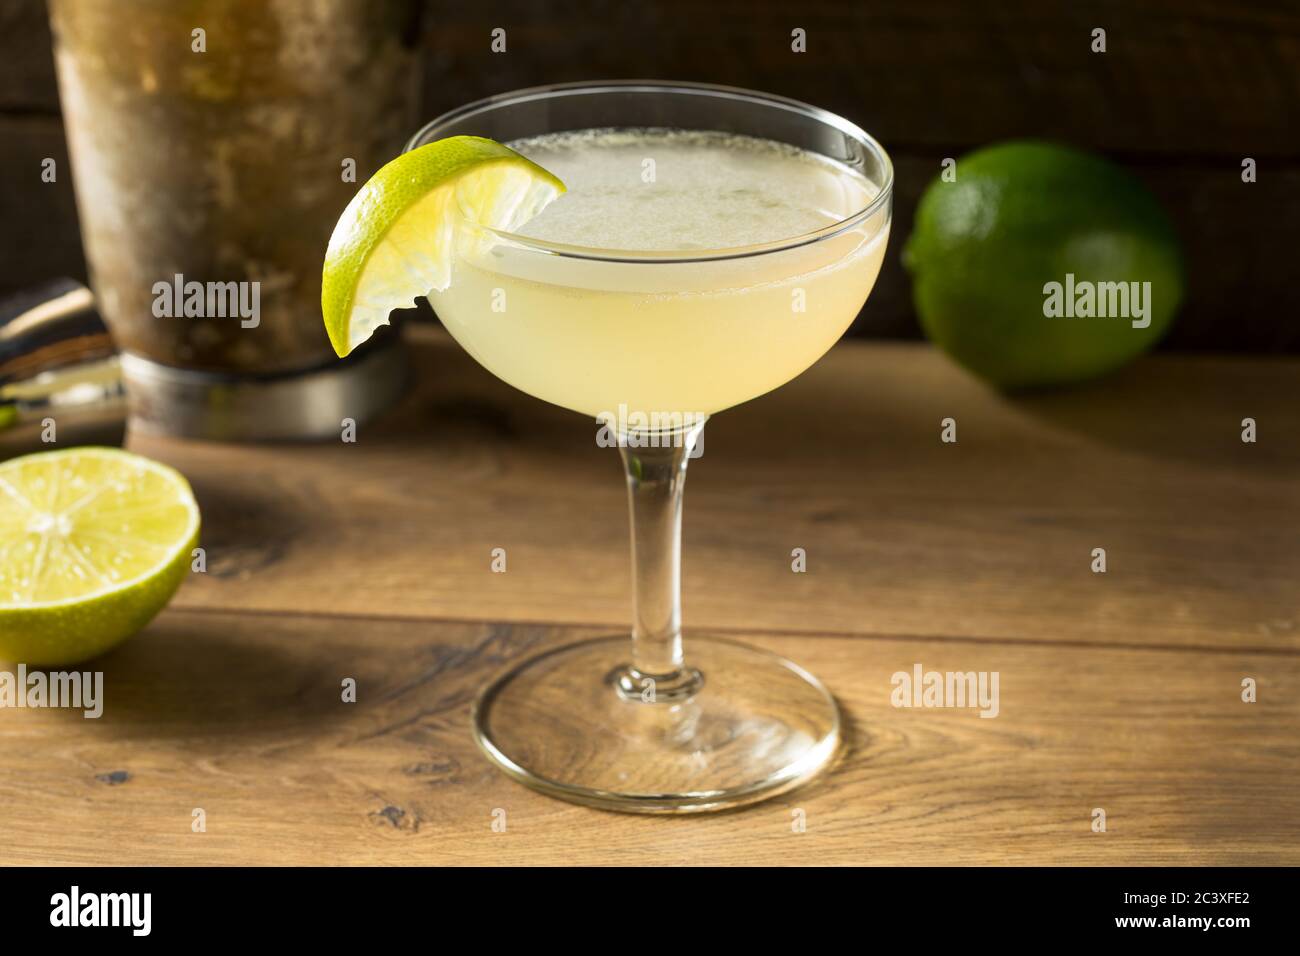 Boozy Rum and LIme Daiquiri Ready to Drink Stock Photo